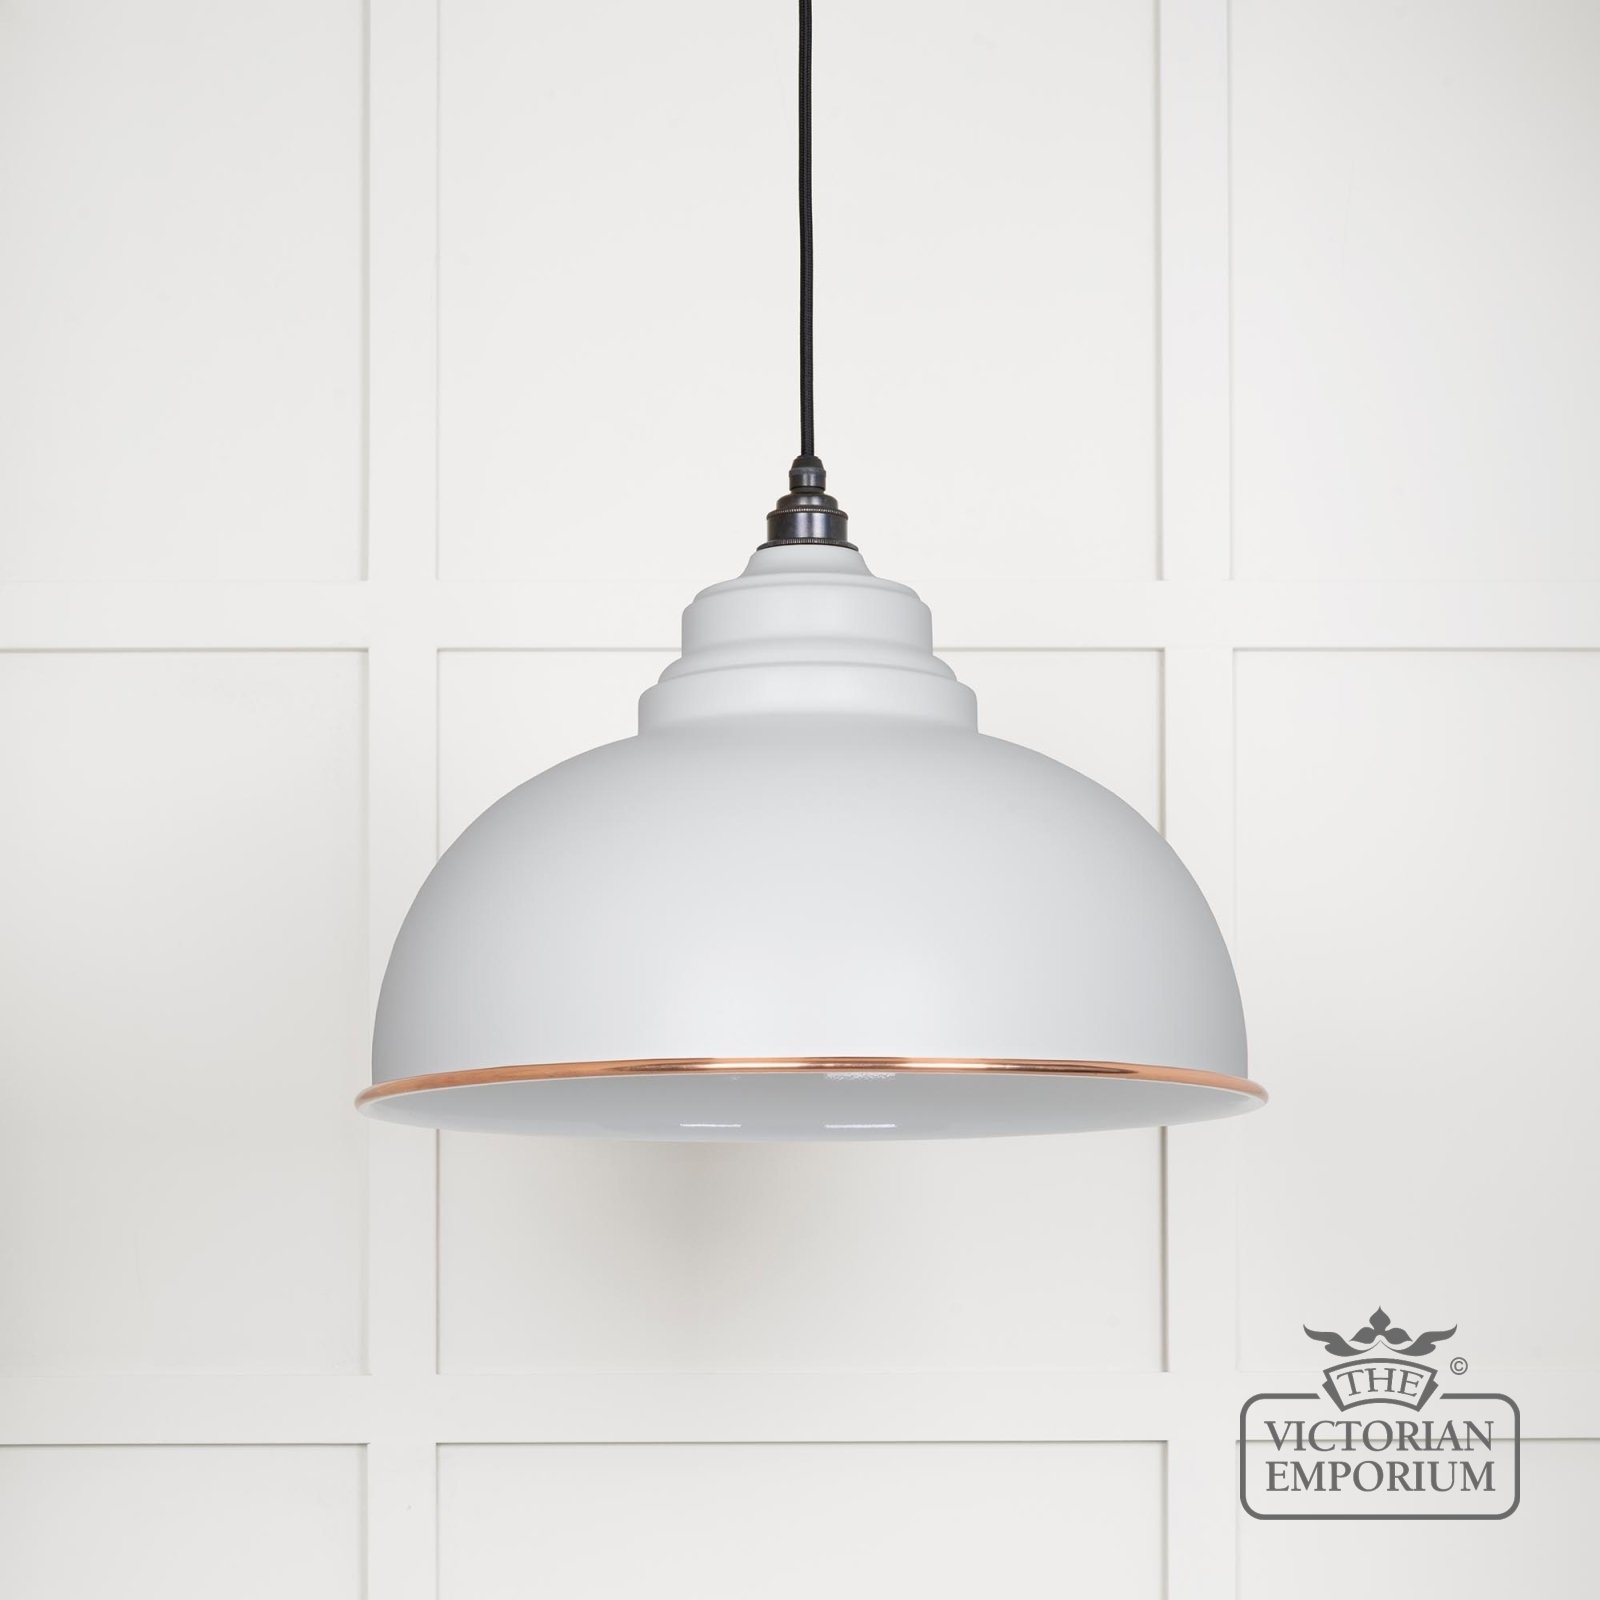 Harlow pendant light in Flock with white gloss interior